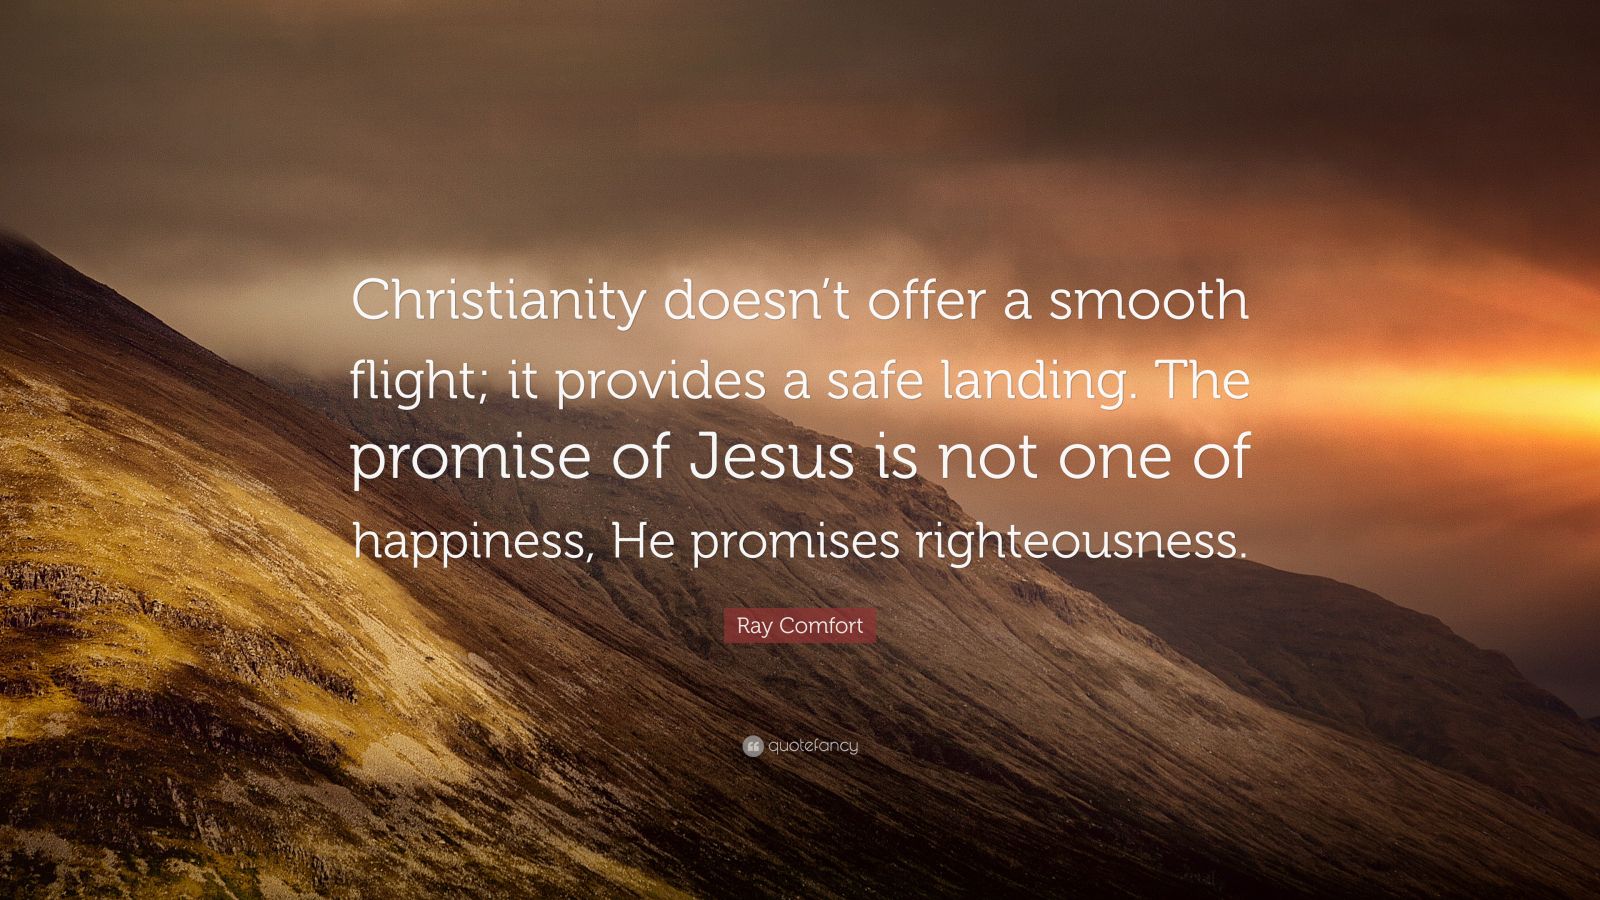 https://quotefancy.com/media/wallpaper/1600x900/6241397-Ray-Comfort-Quote-Christianity-doesn-t-offer-a-smooth-flight-it.jpg